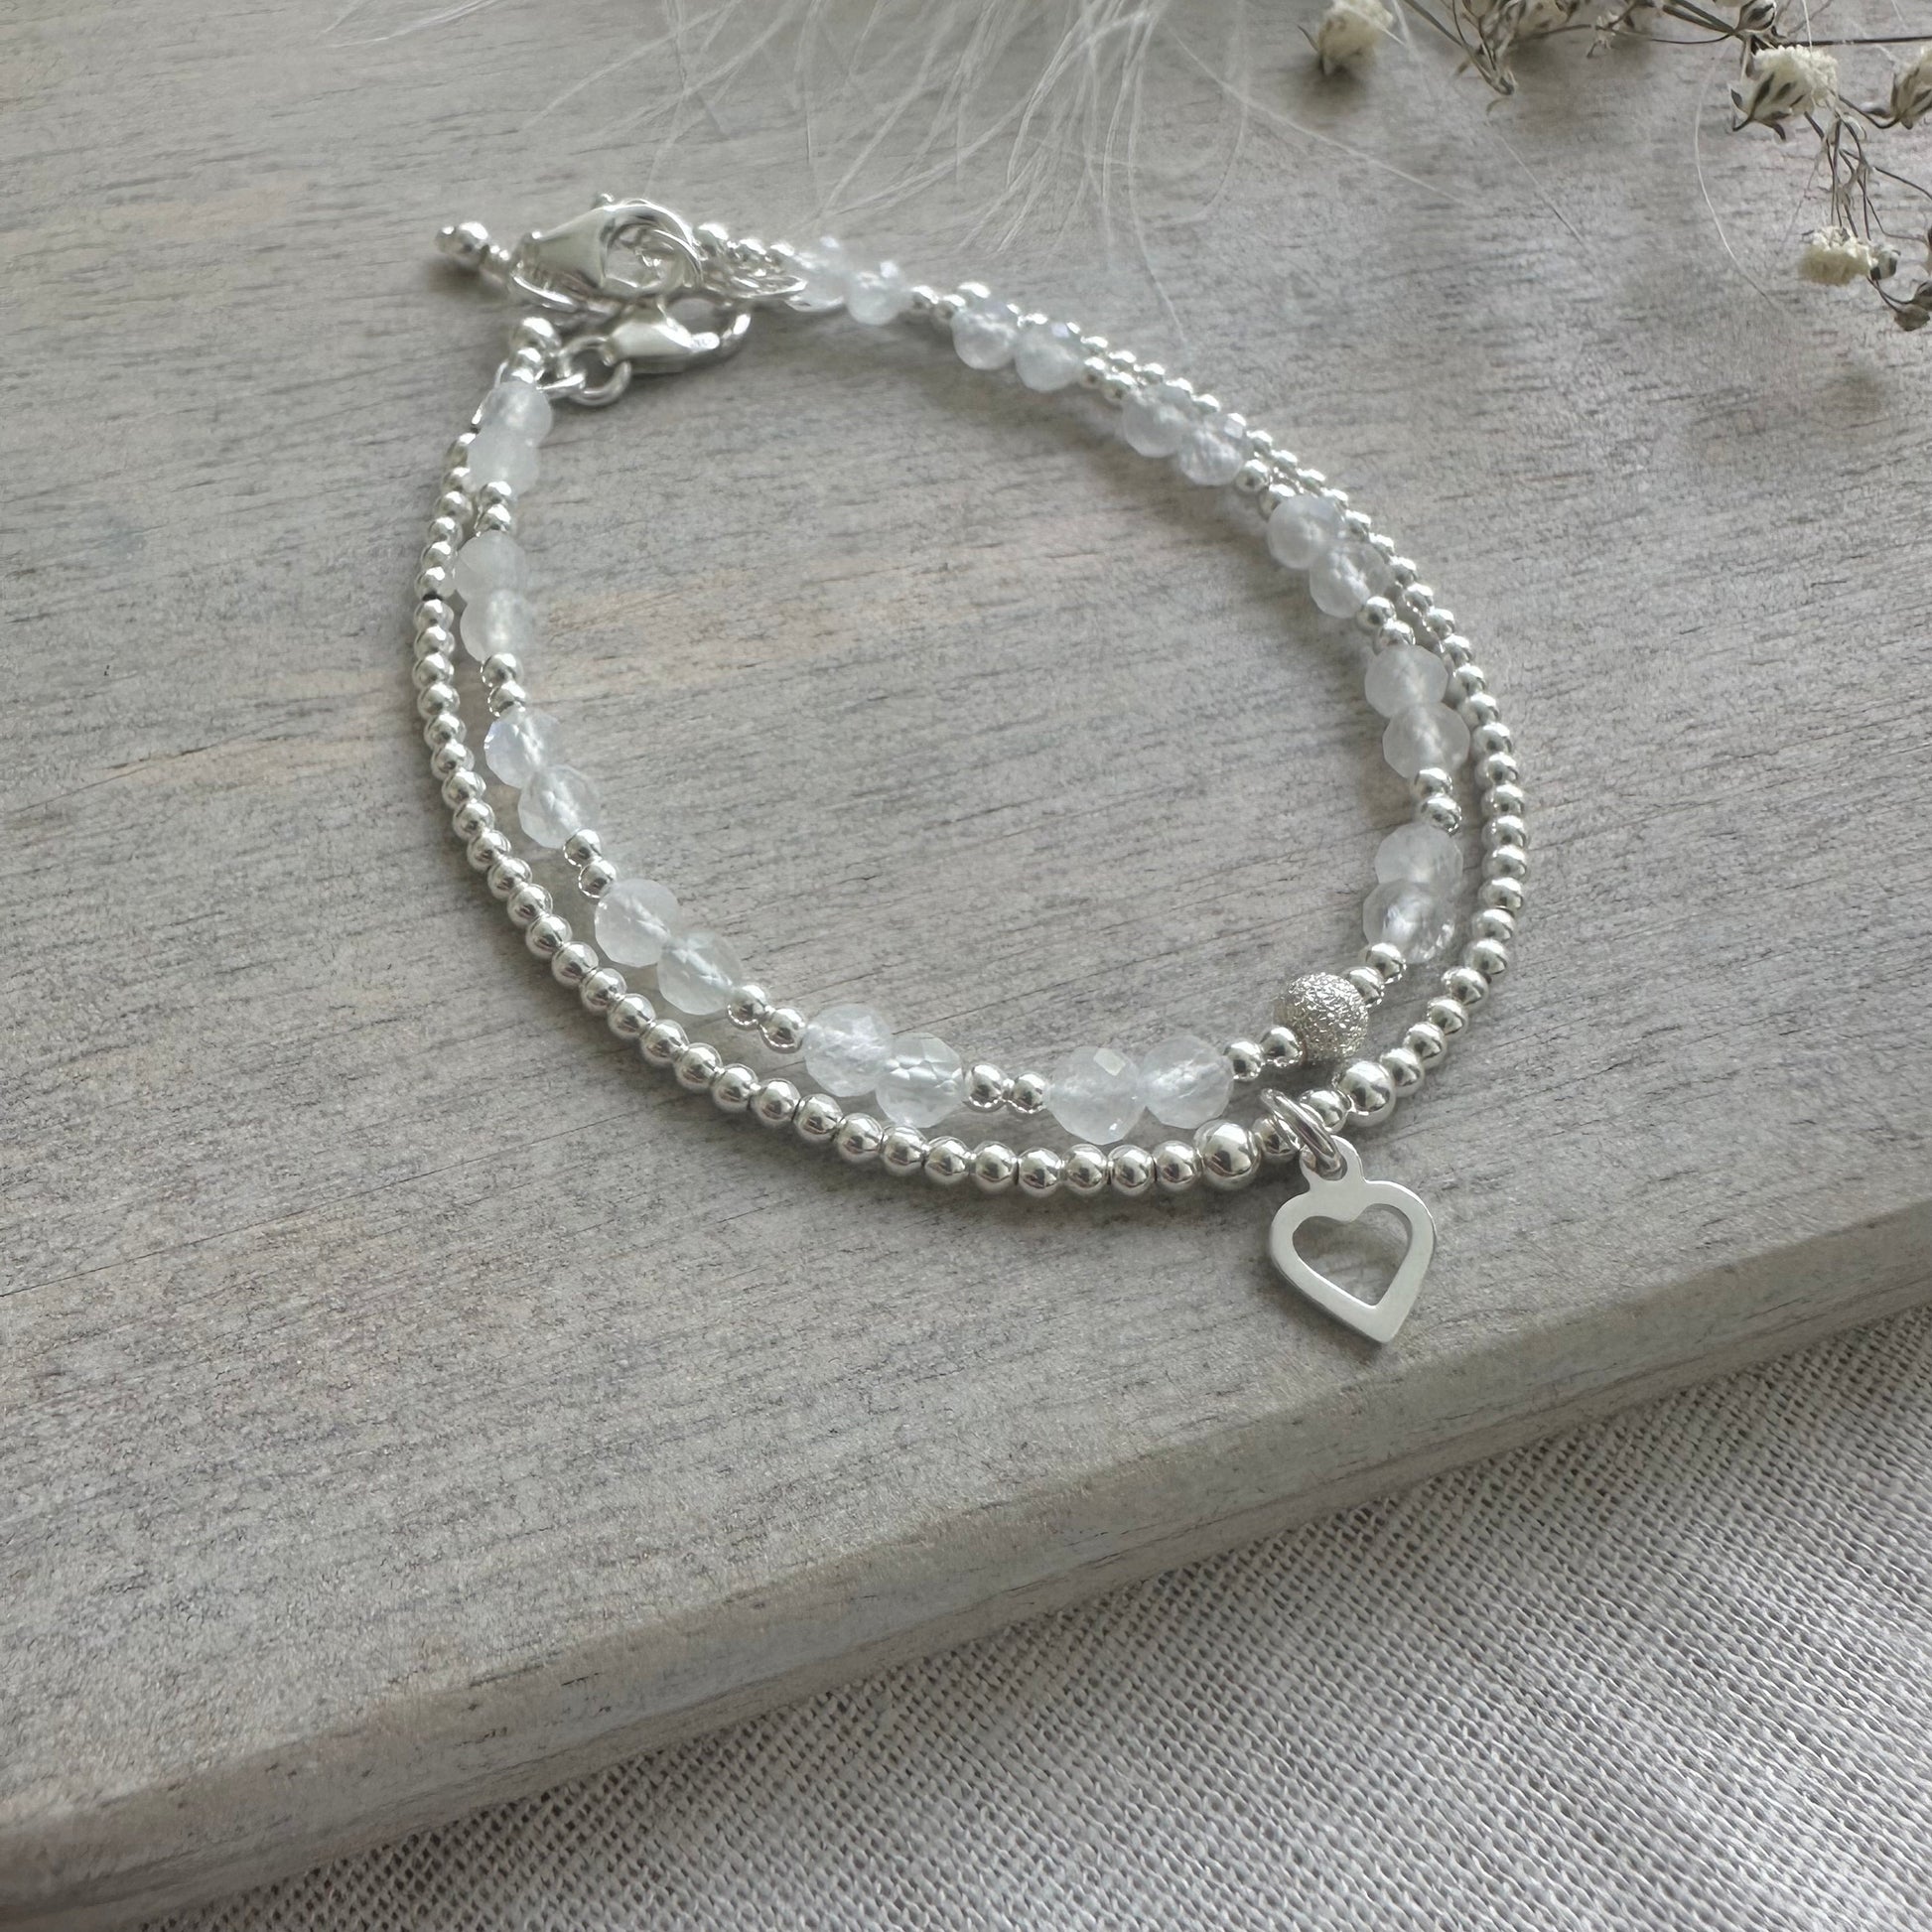 Moonstone Bracelet Set made with June Birthstone and Sterling Silver, June Birthday Gift for Women